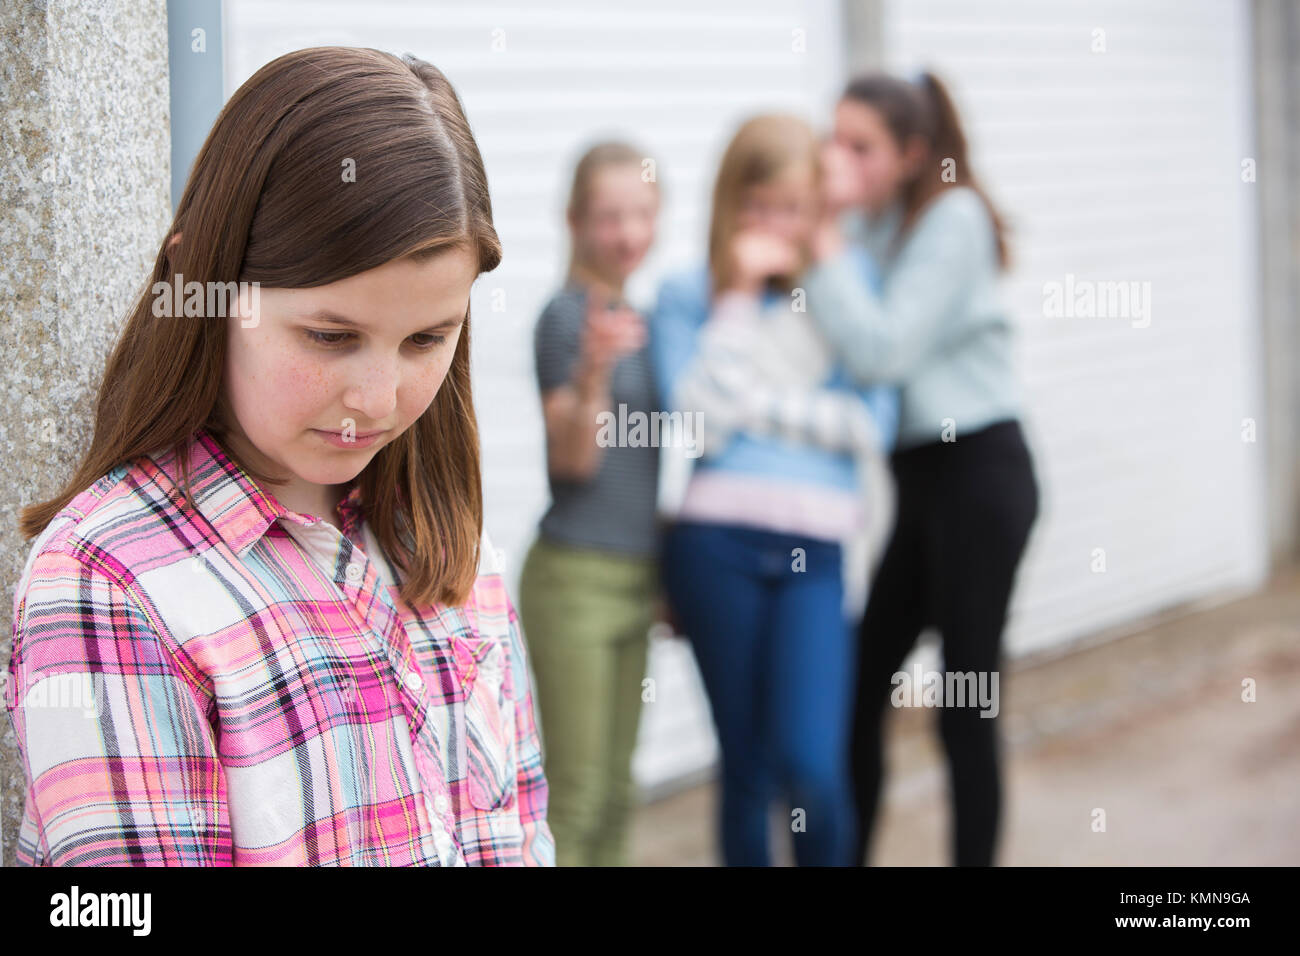 Sad Pre Teen Girl Feeling Left Out By Friends Stock Photo